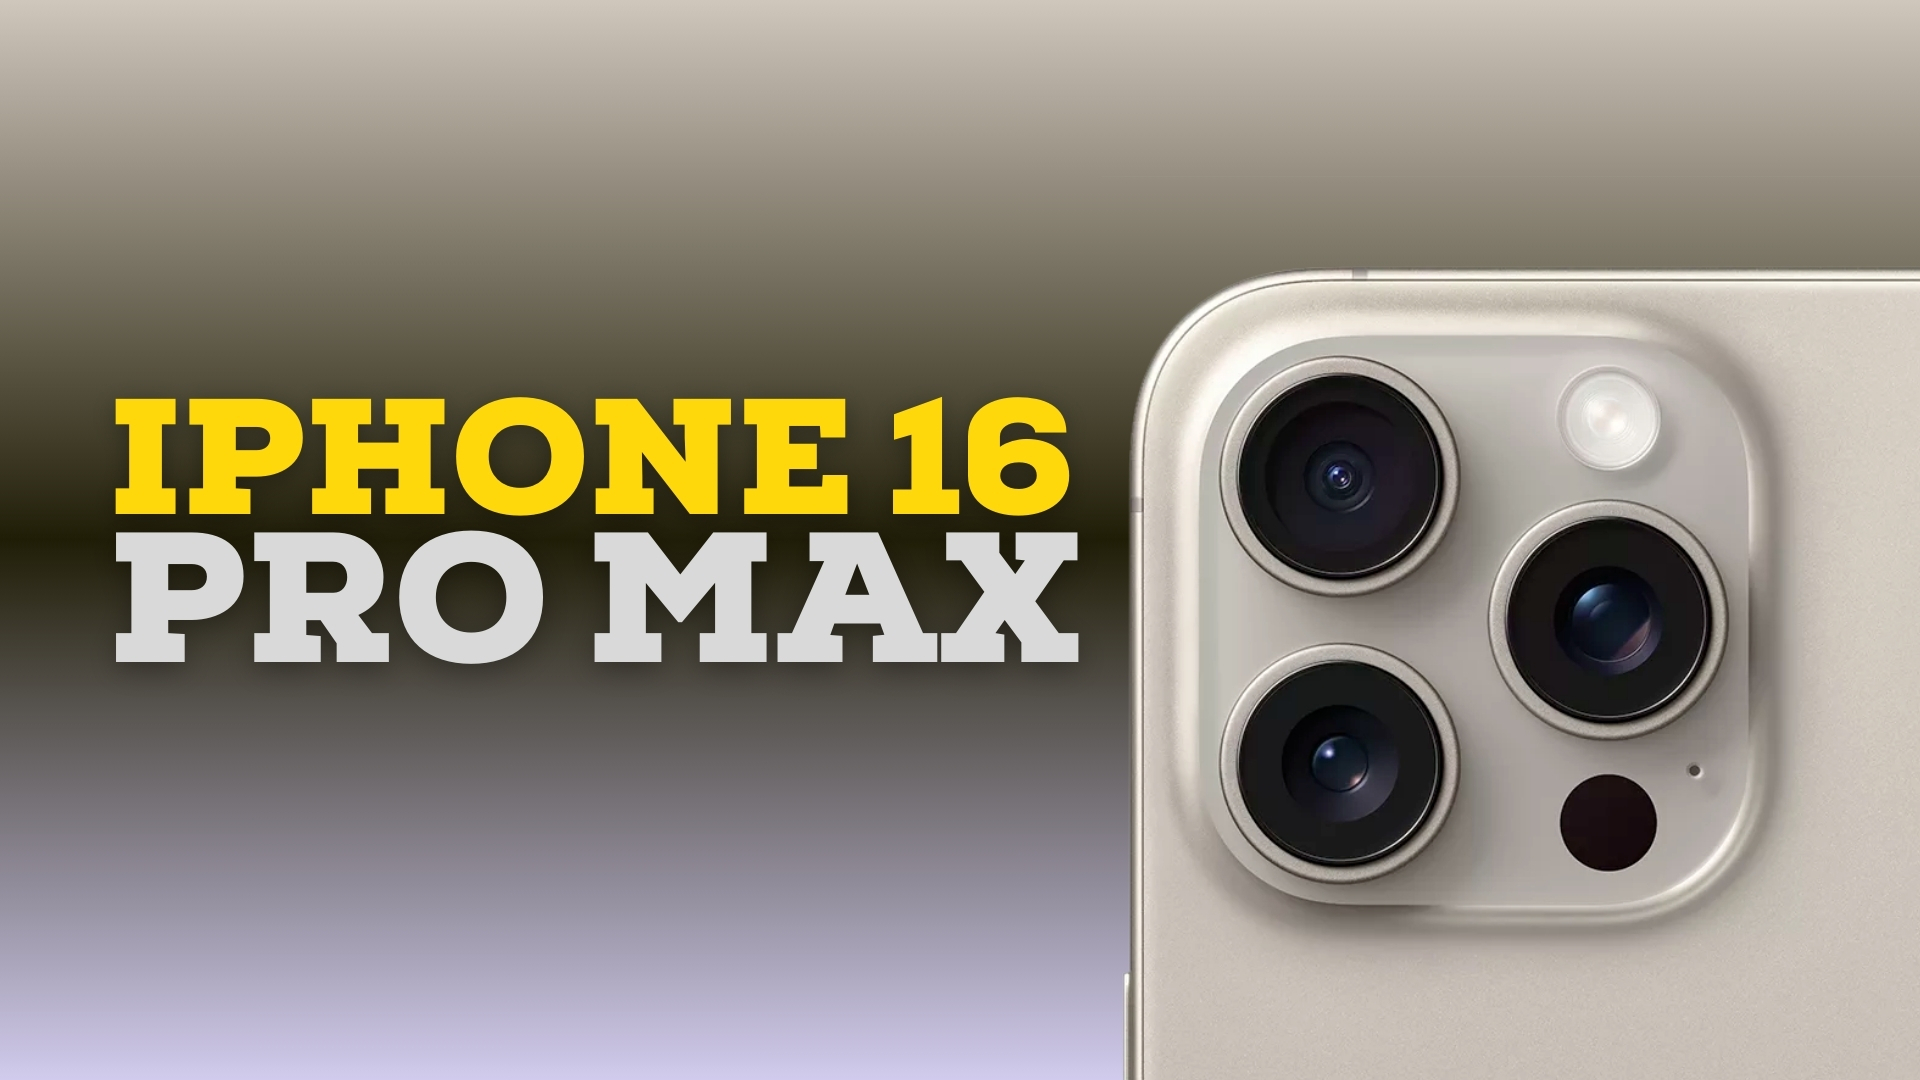 iPhone 16 Pro Max: Release date rumors, news, and more